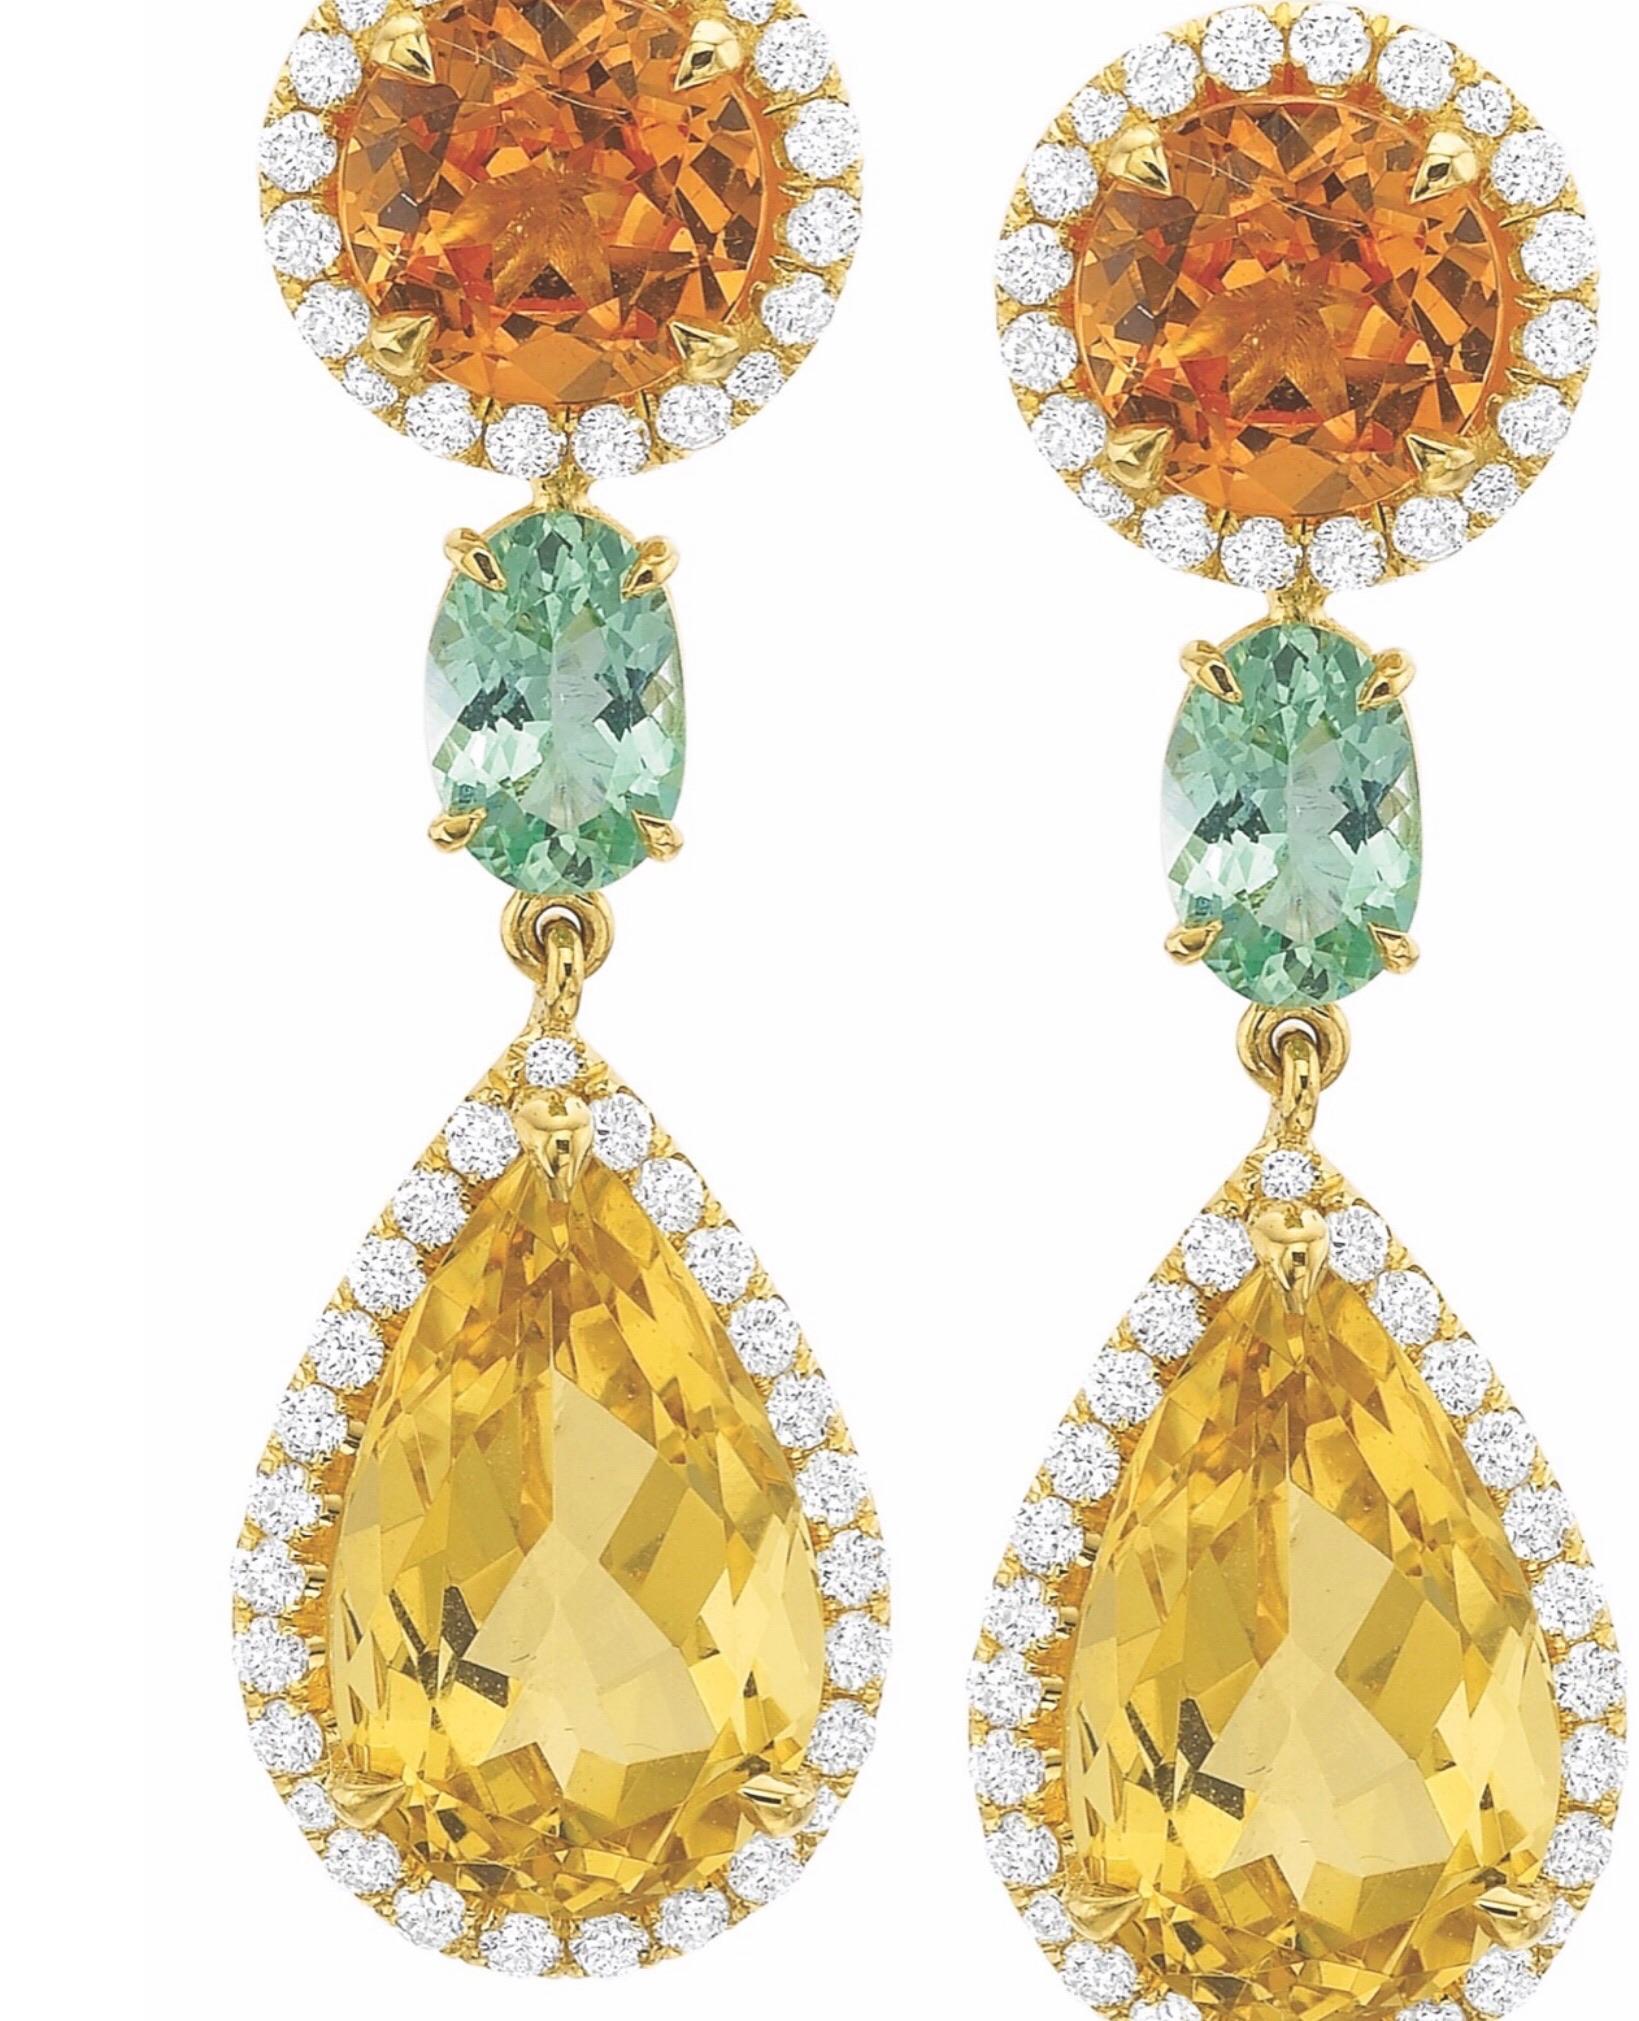 A striking color combination takes place with these Andrew Glassford custom earrings.  2.34 carats of Mandarin Garnets make up the top portion followed by .86 ctw of Green Beryl, and 5.50 ctw of pearl shaped Yellow Beryl in 18k Yellow Gold.  The